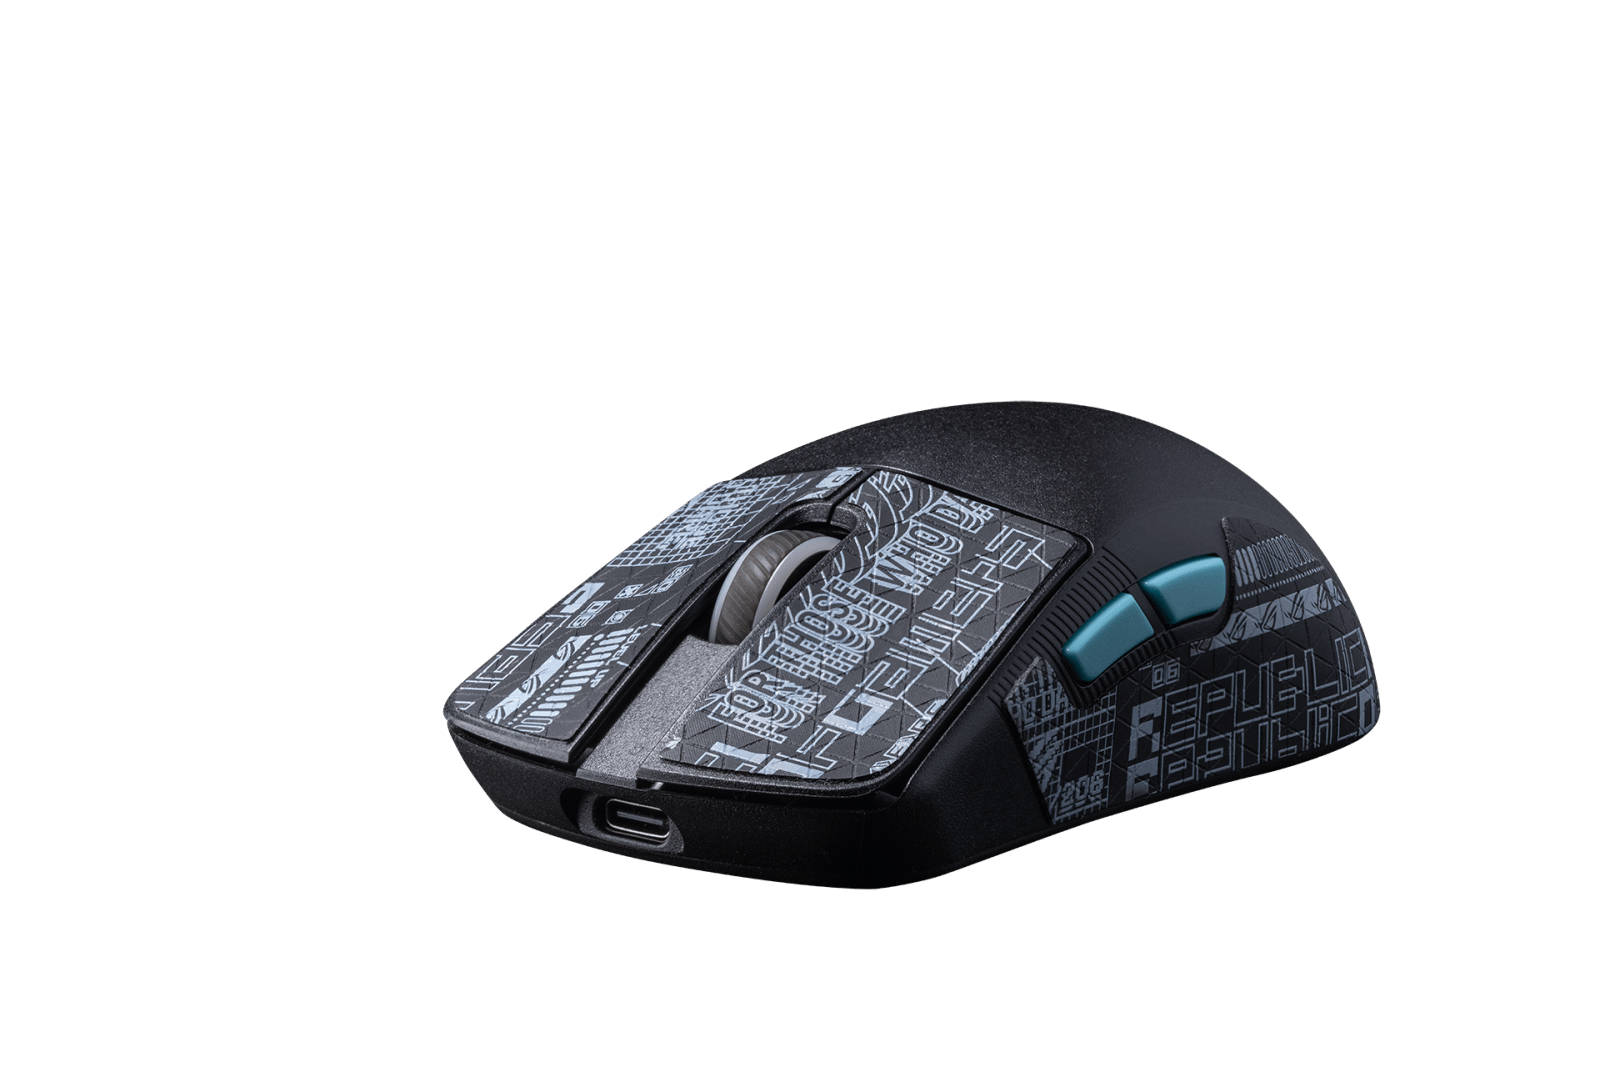 Asus Harpe Ace: presented the company's new mouse and mousepad